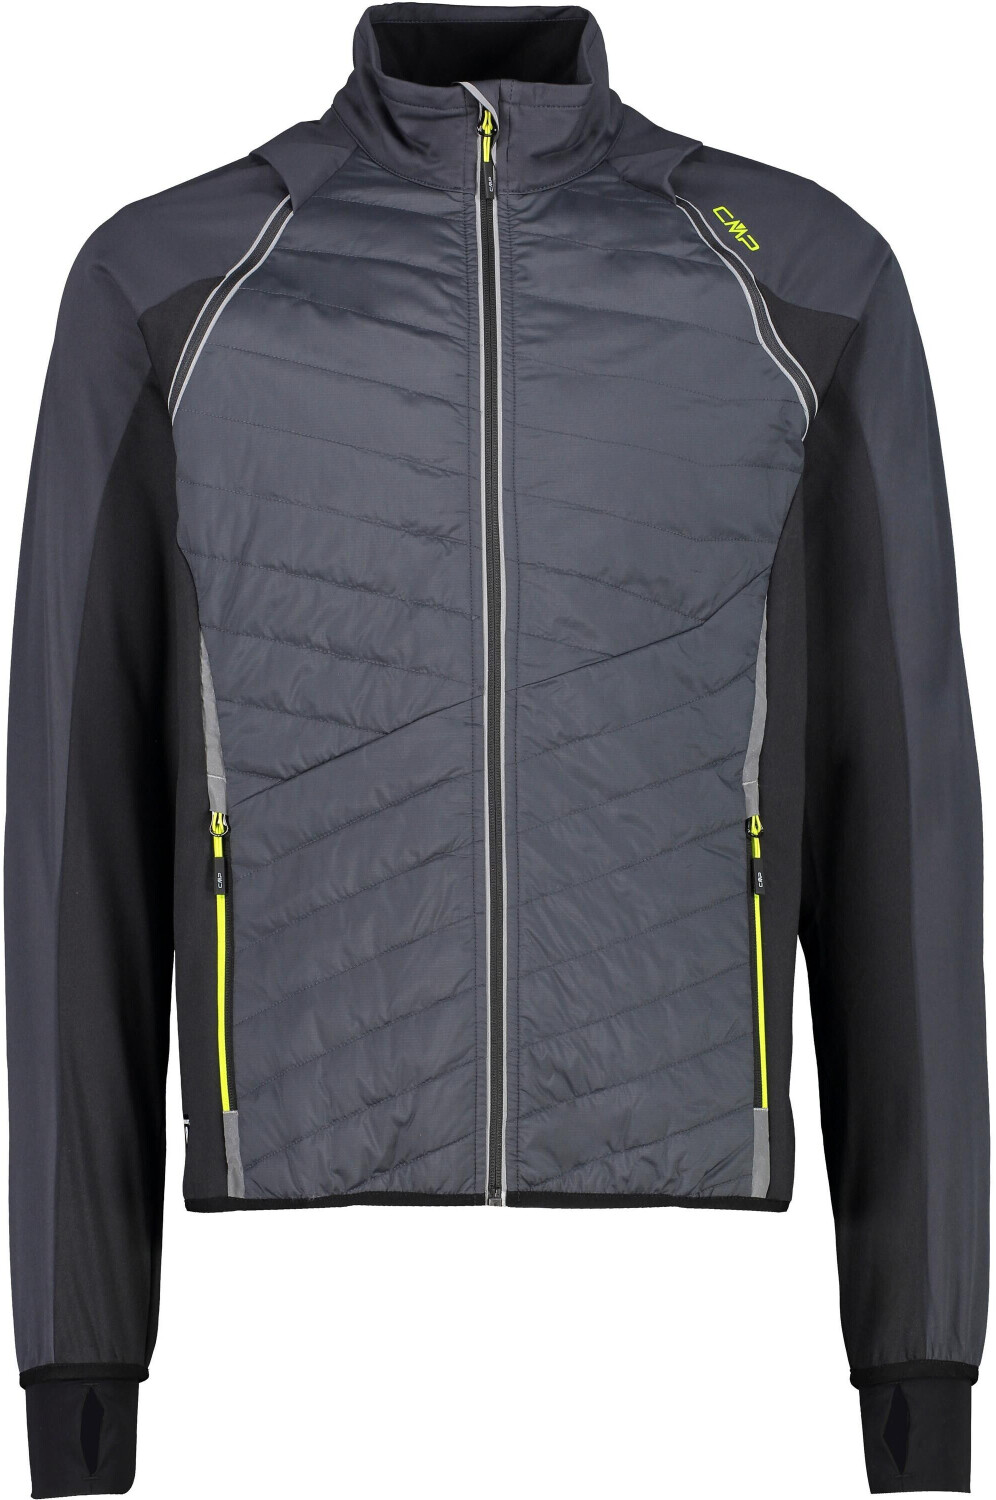 with CMP – jacket Unlimitech Deals £51.50 Sleeves on Best Buy from Hybrid (Today) Men\'s Removable